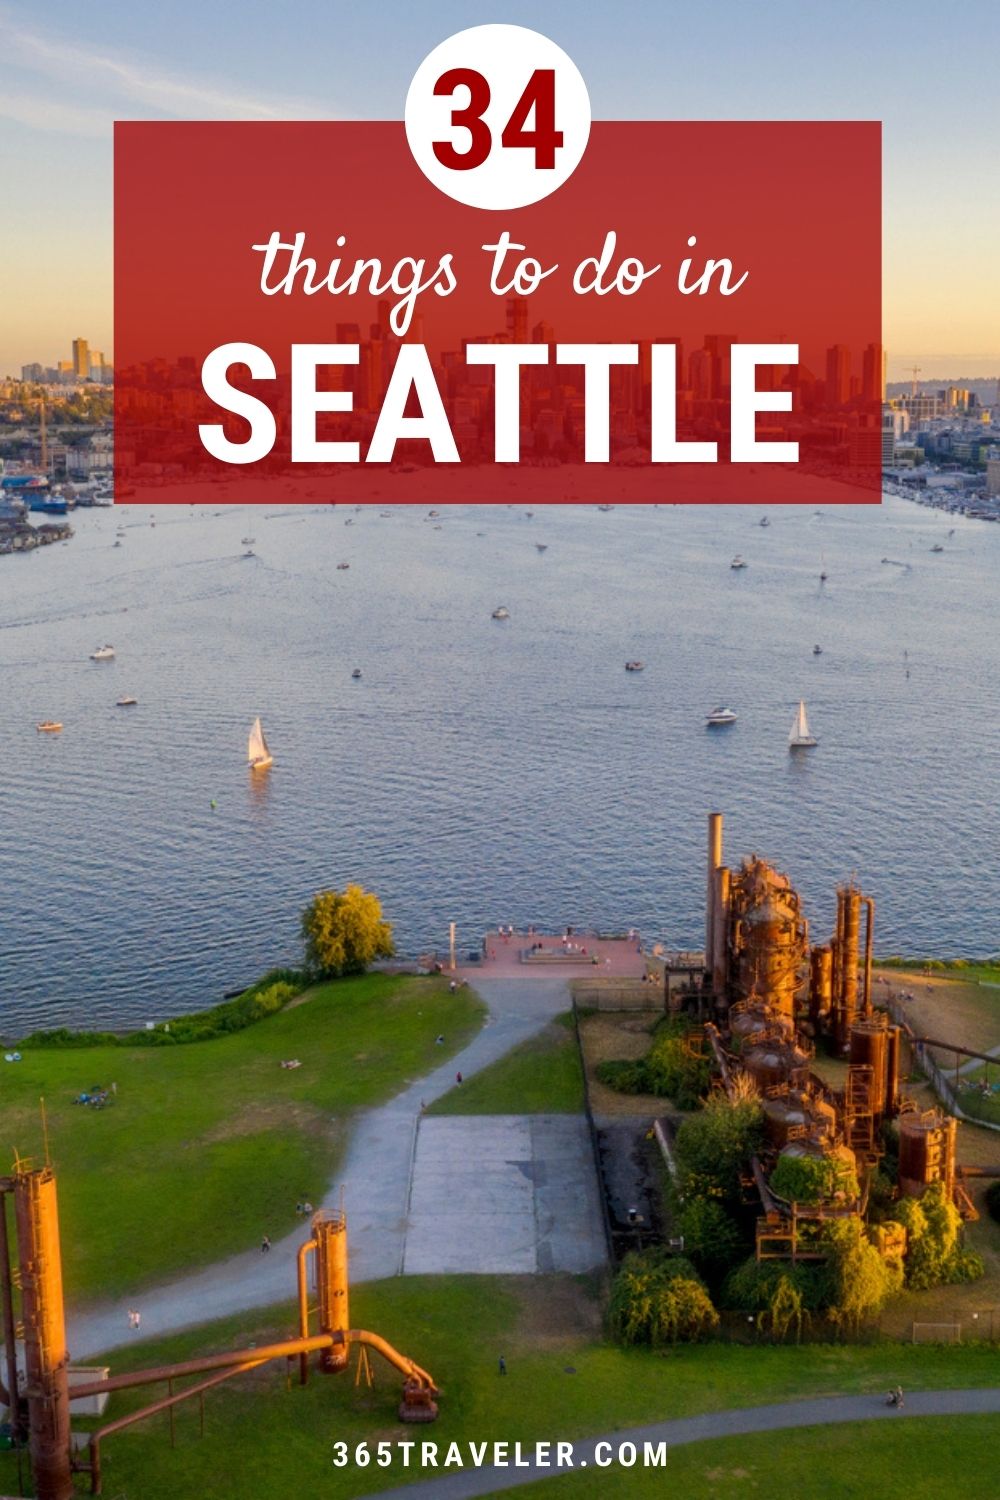 34 Amazing Things To Do in Seattle You’ll Love